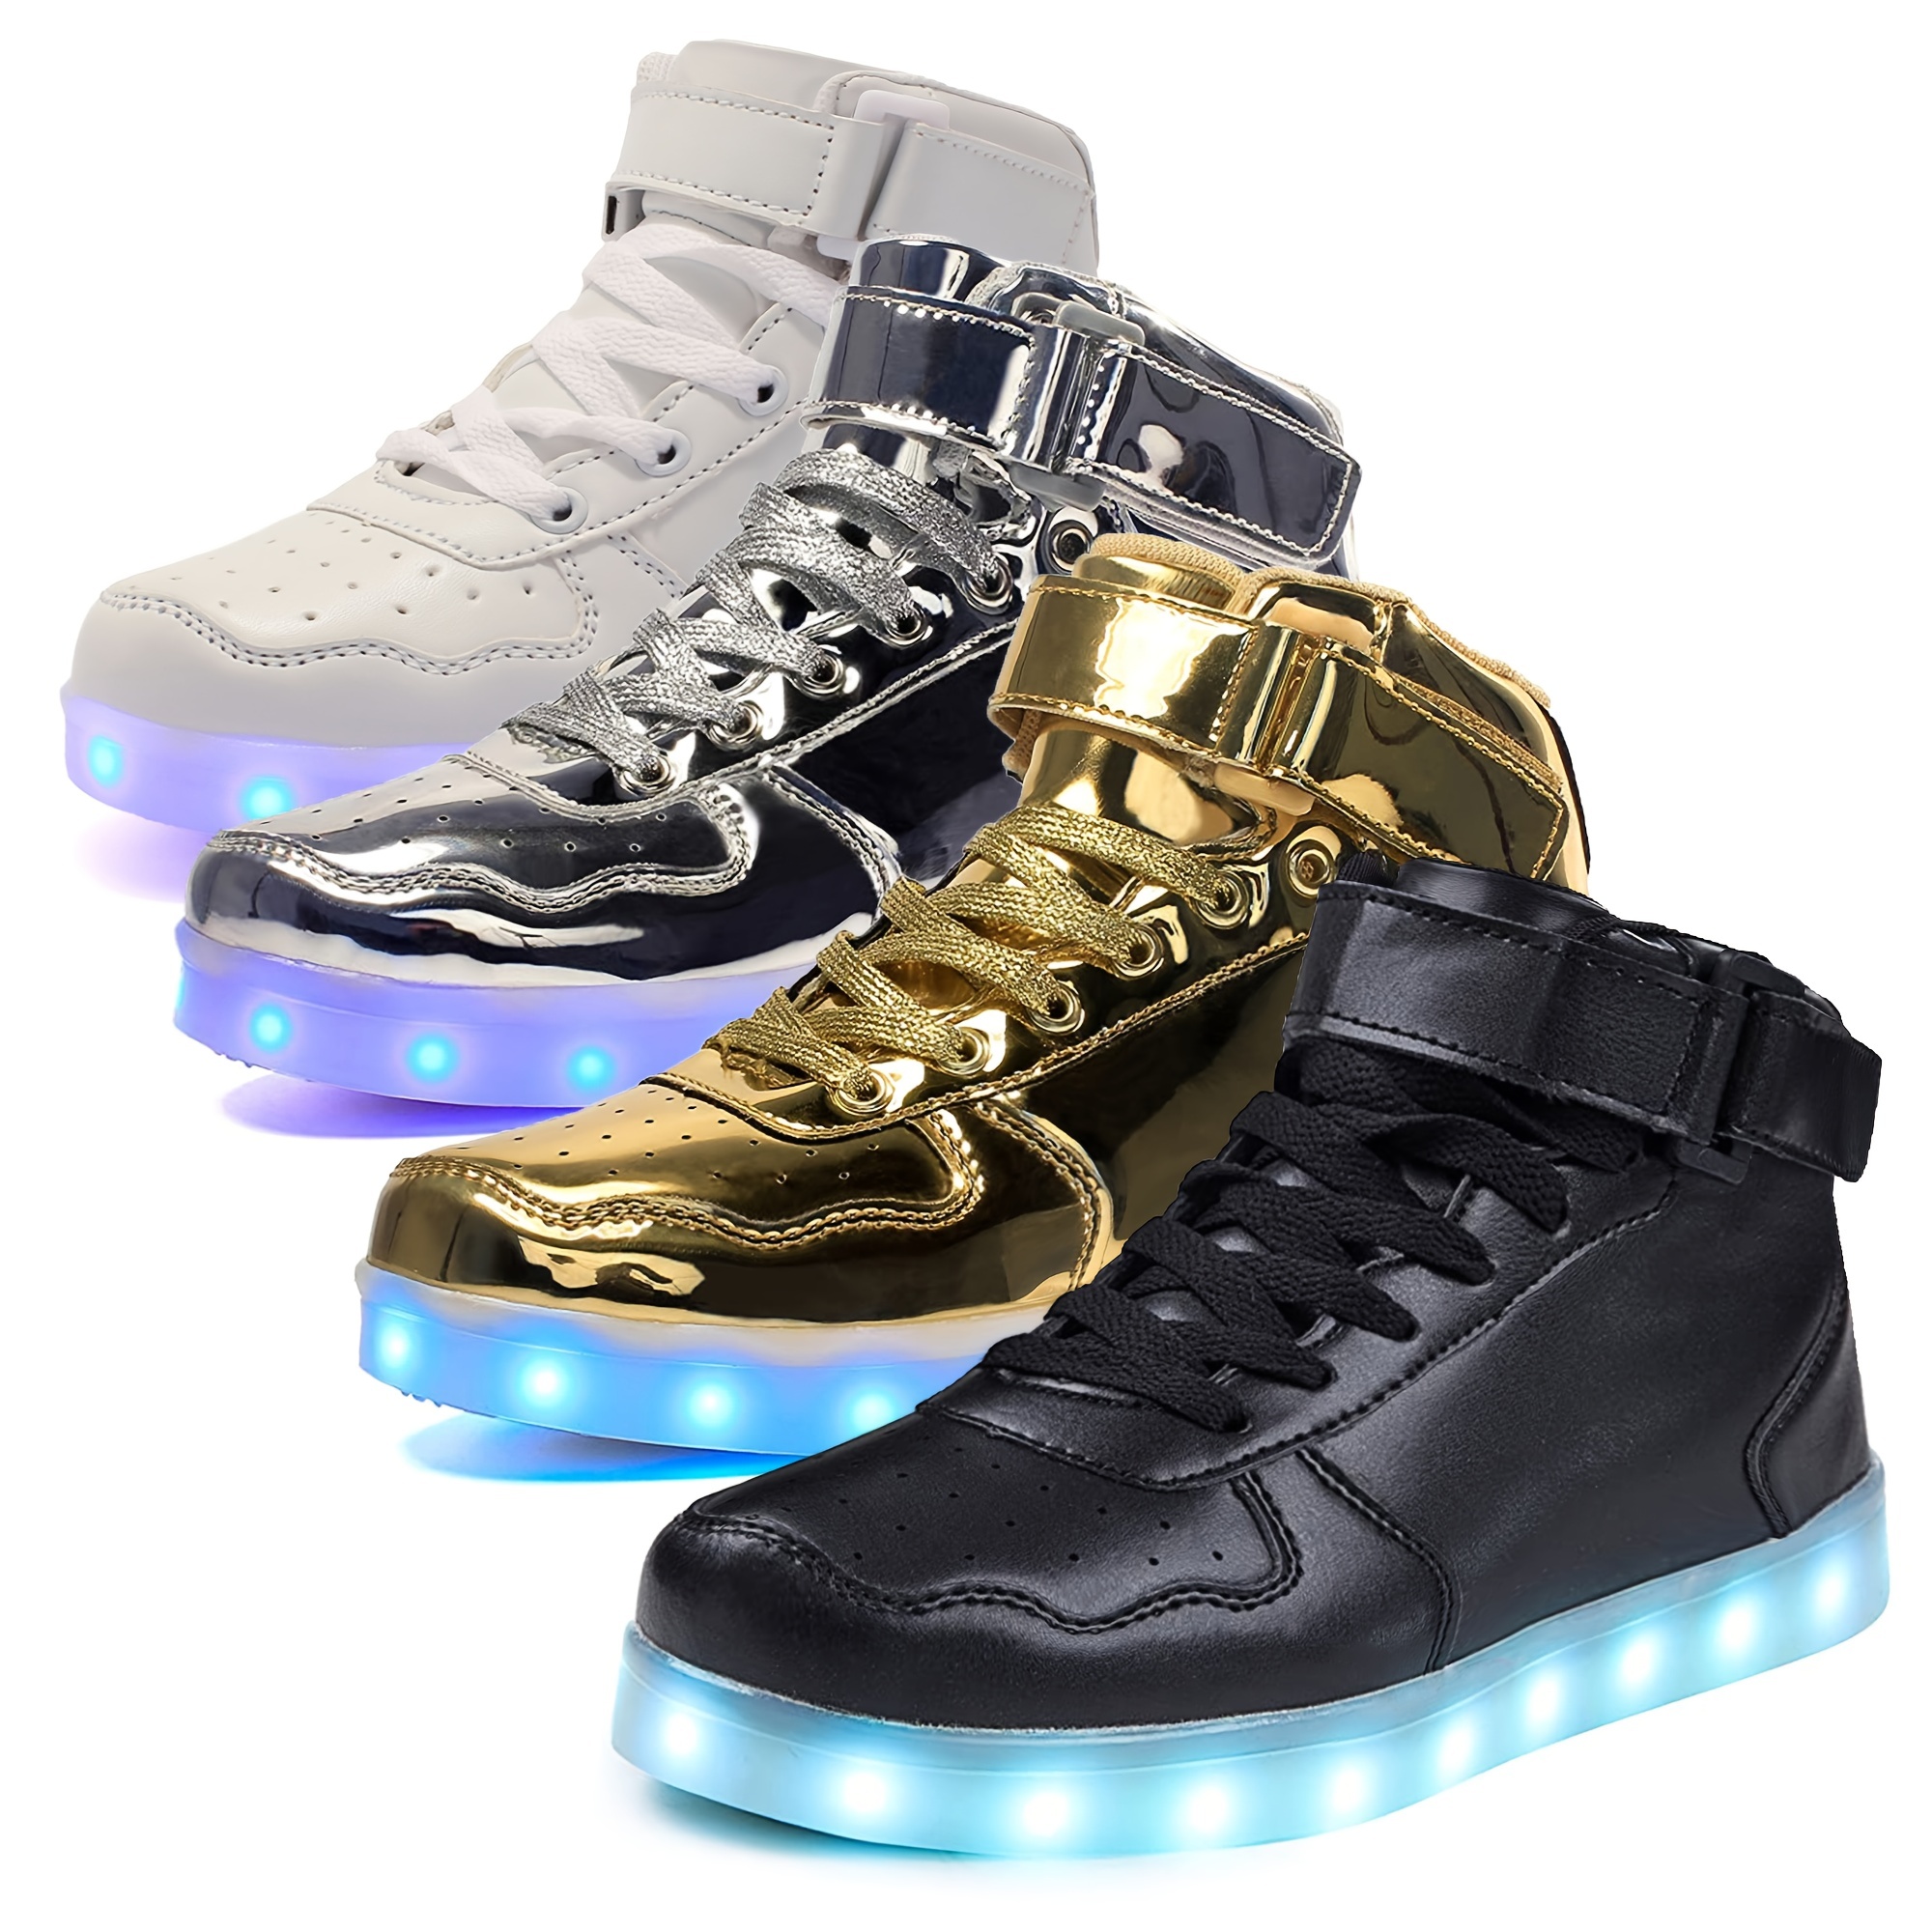 Unisex LED Shoes High Top Light Up Sneakers for Girls Boys USB Charging